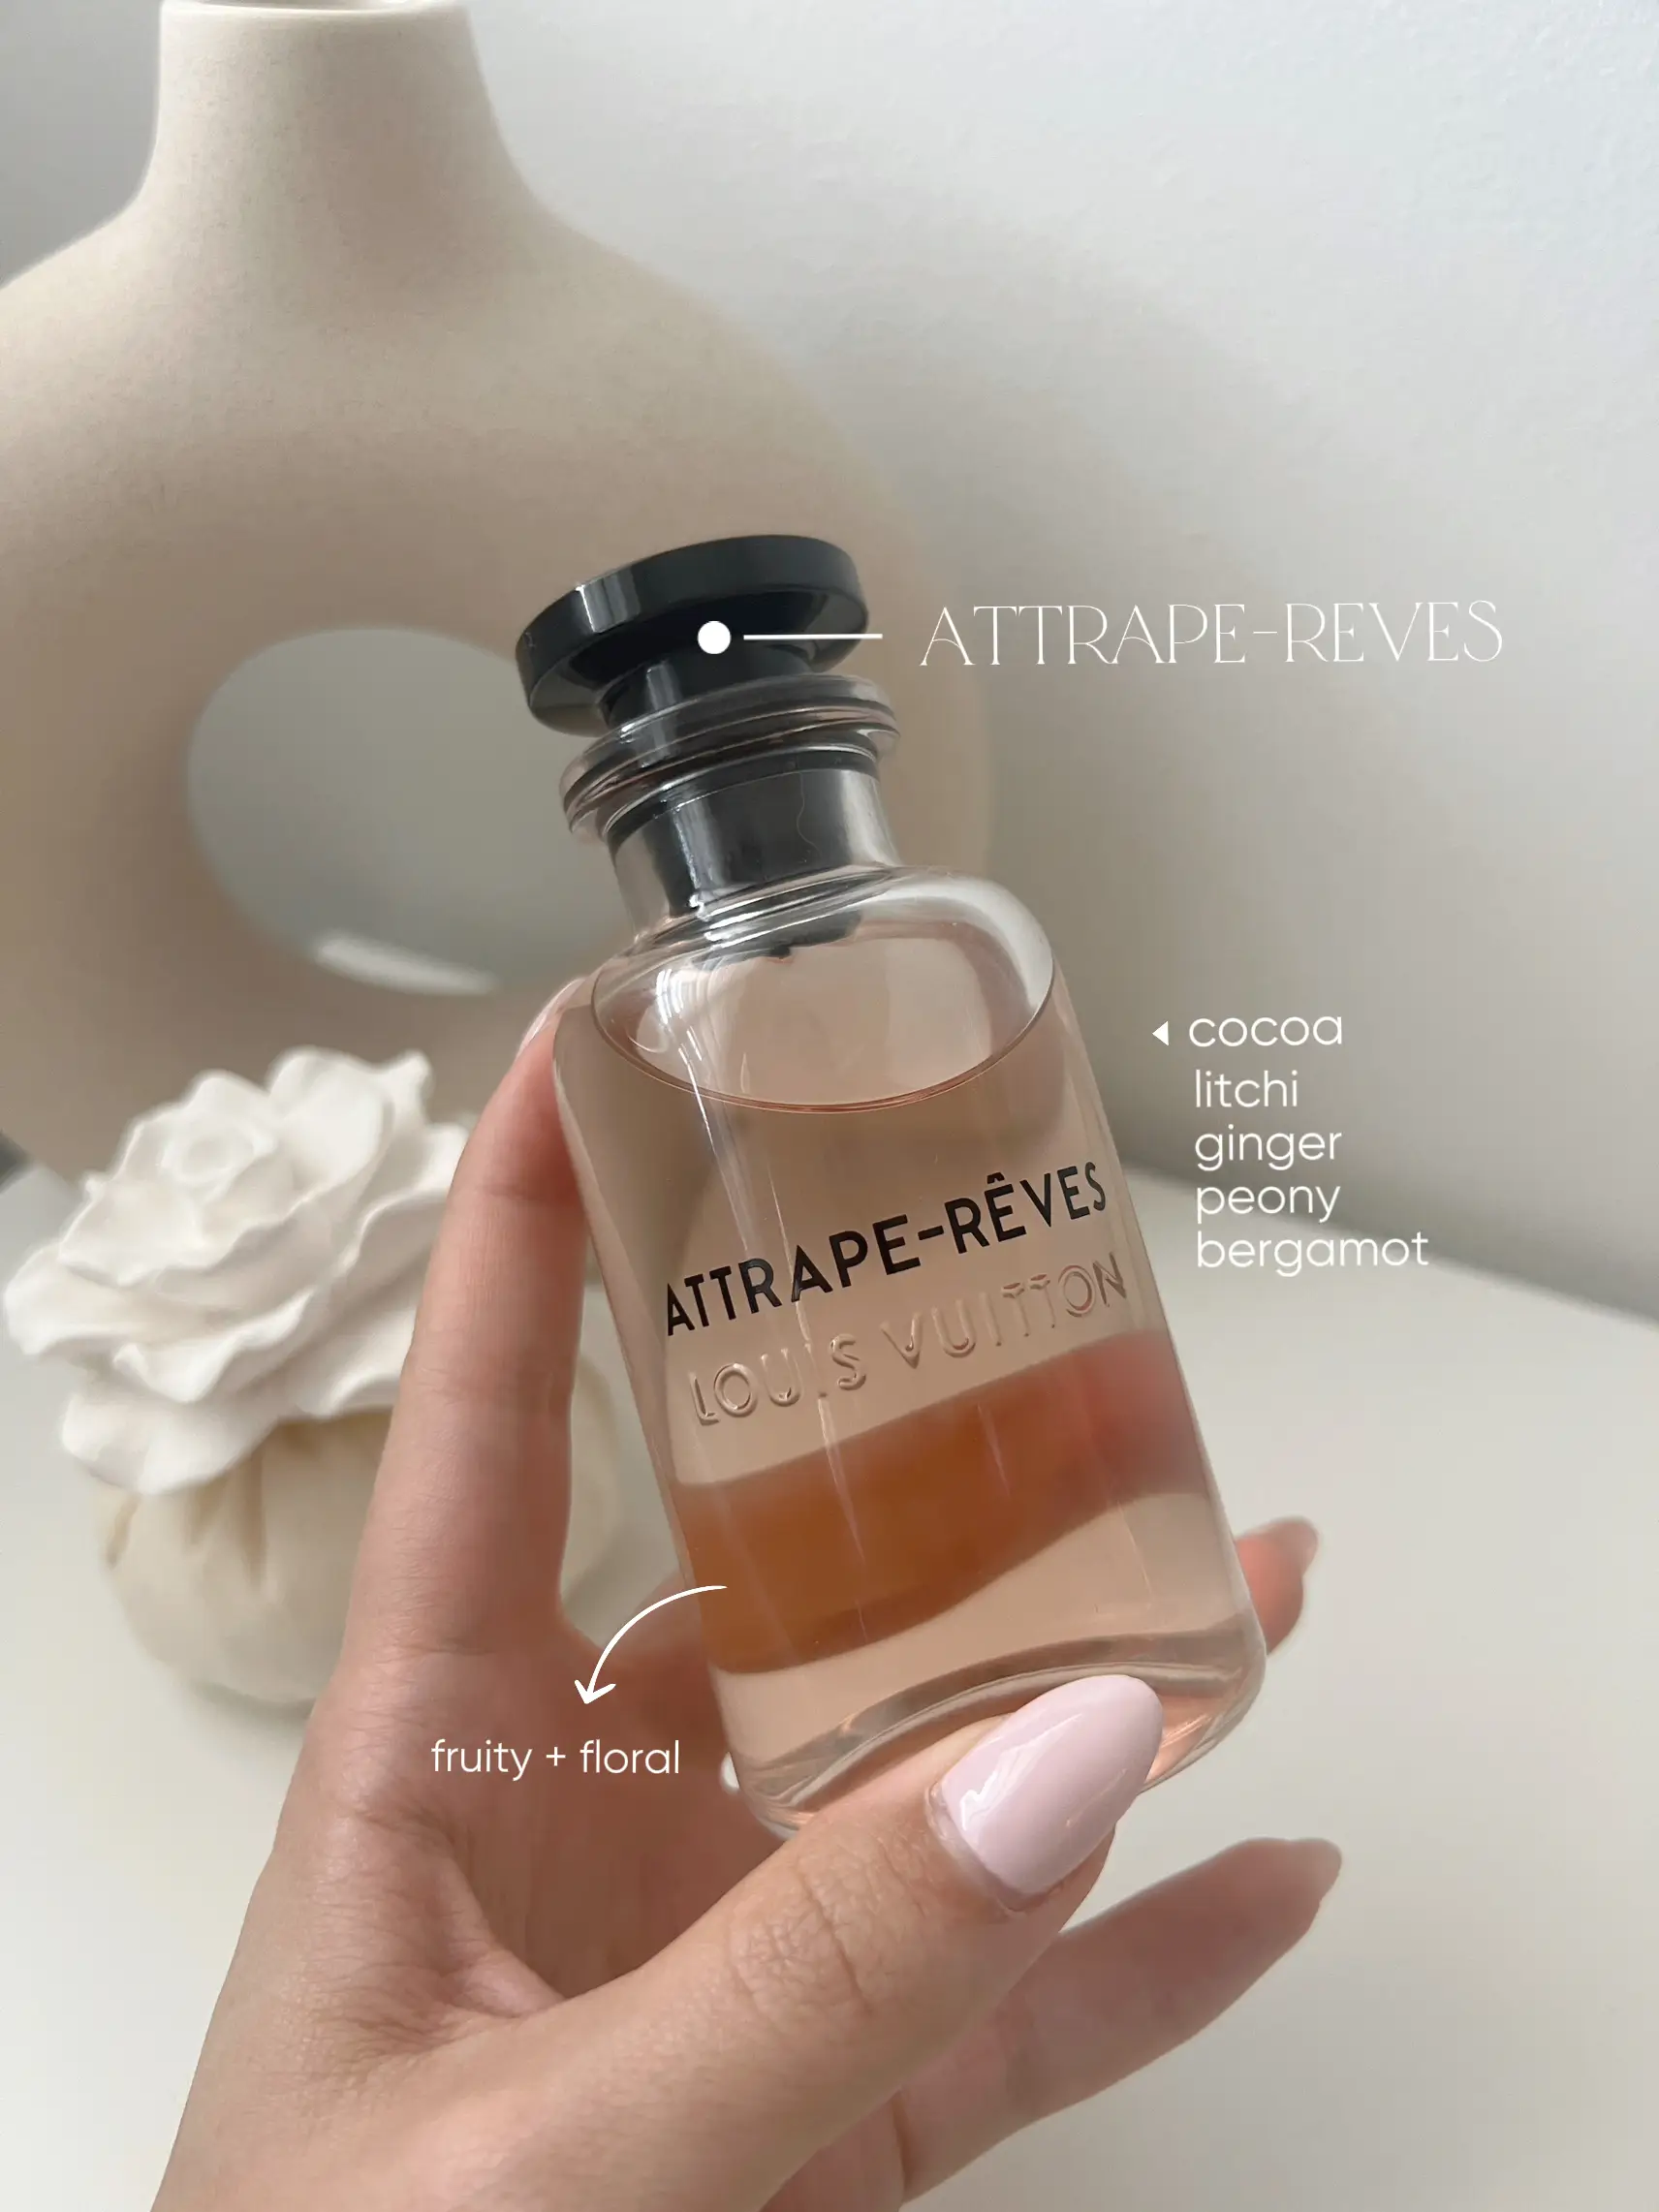 LOUIS VUITTON ATTRAPE REVES REVIEW My current favorite scent 